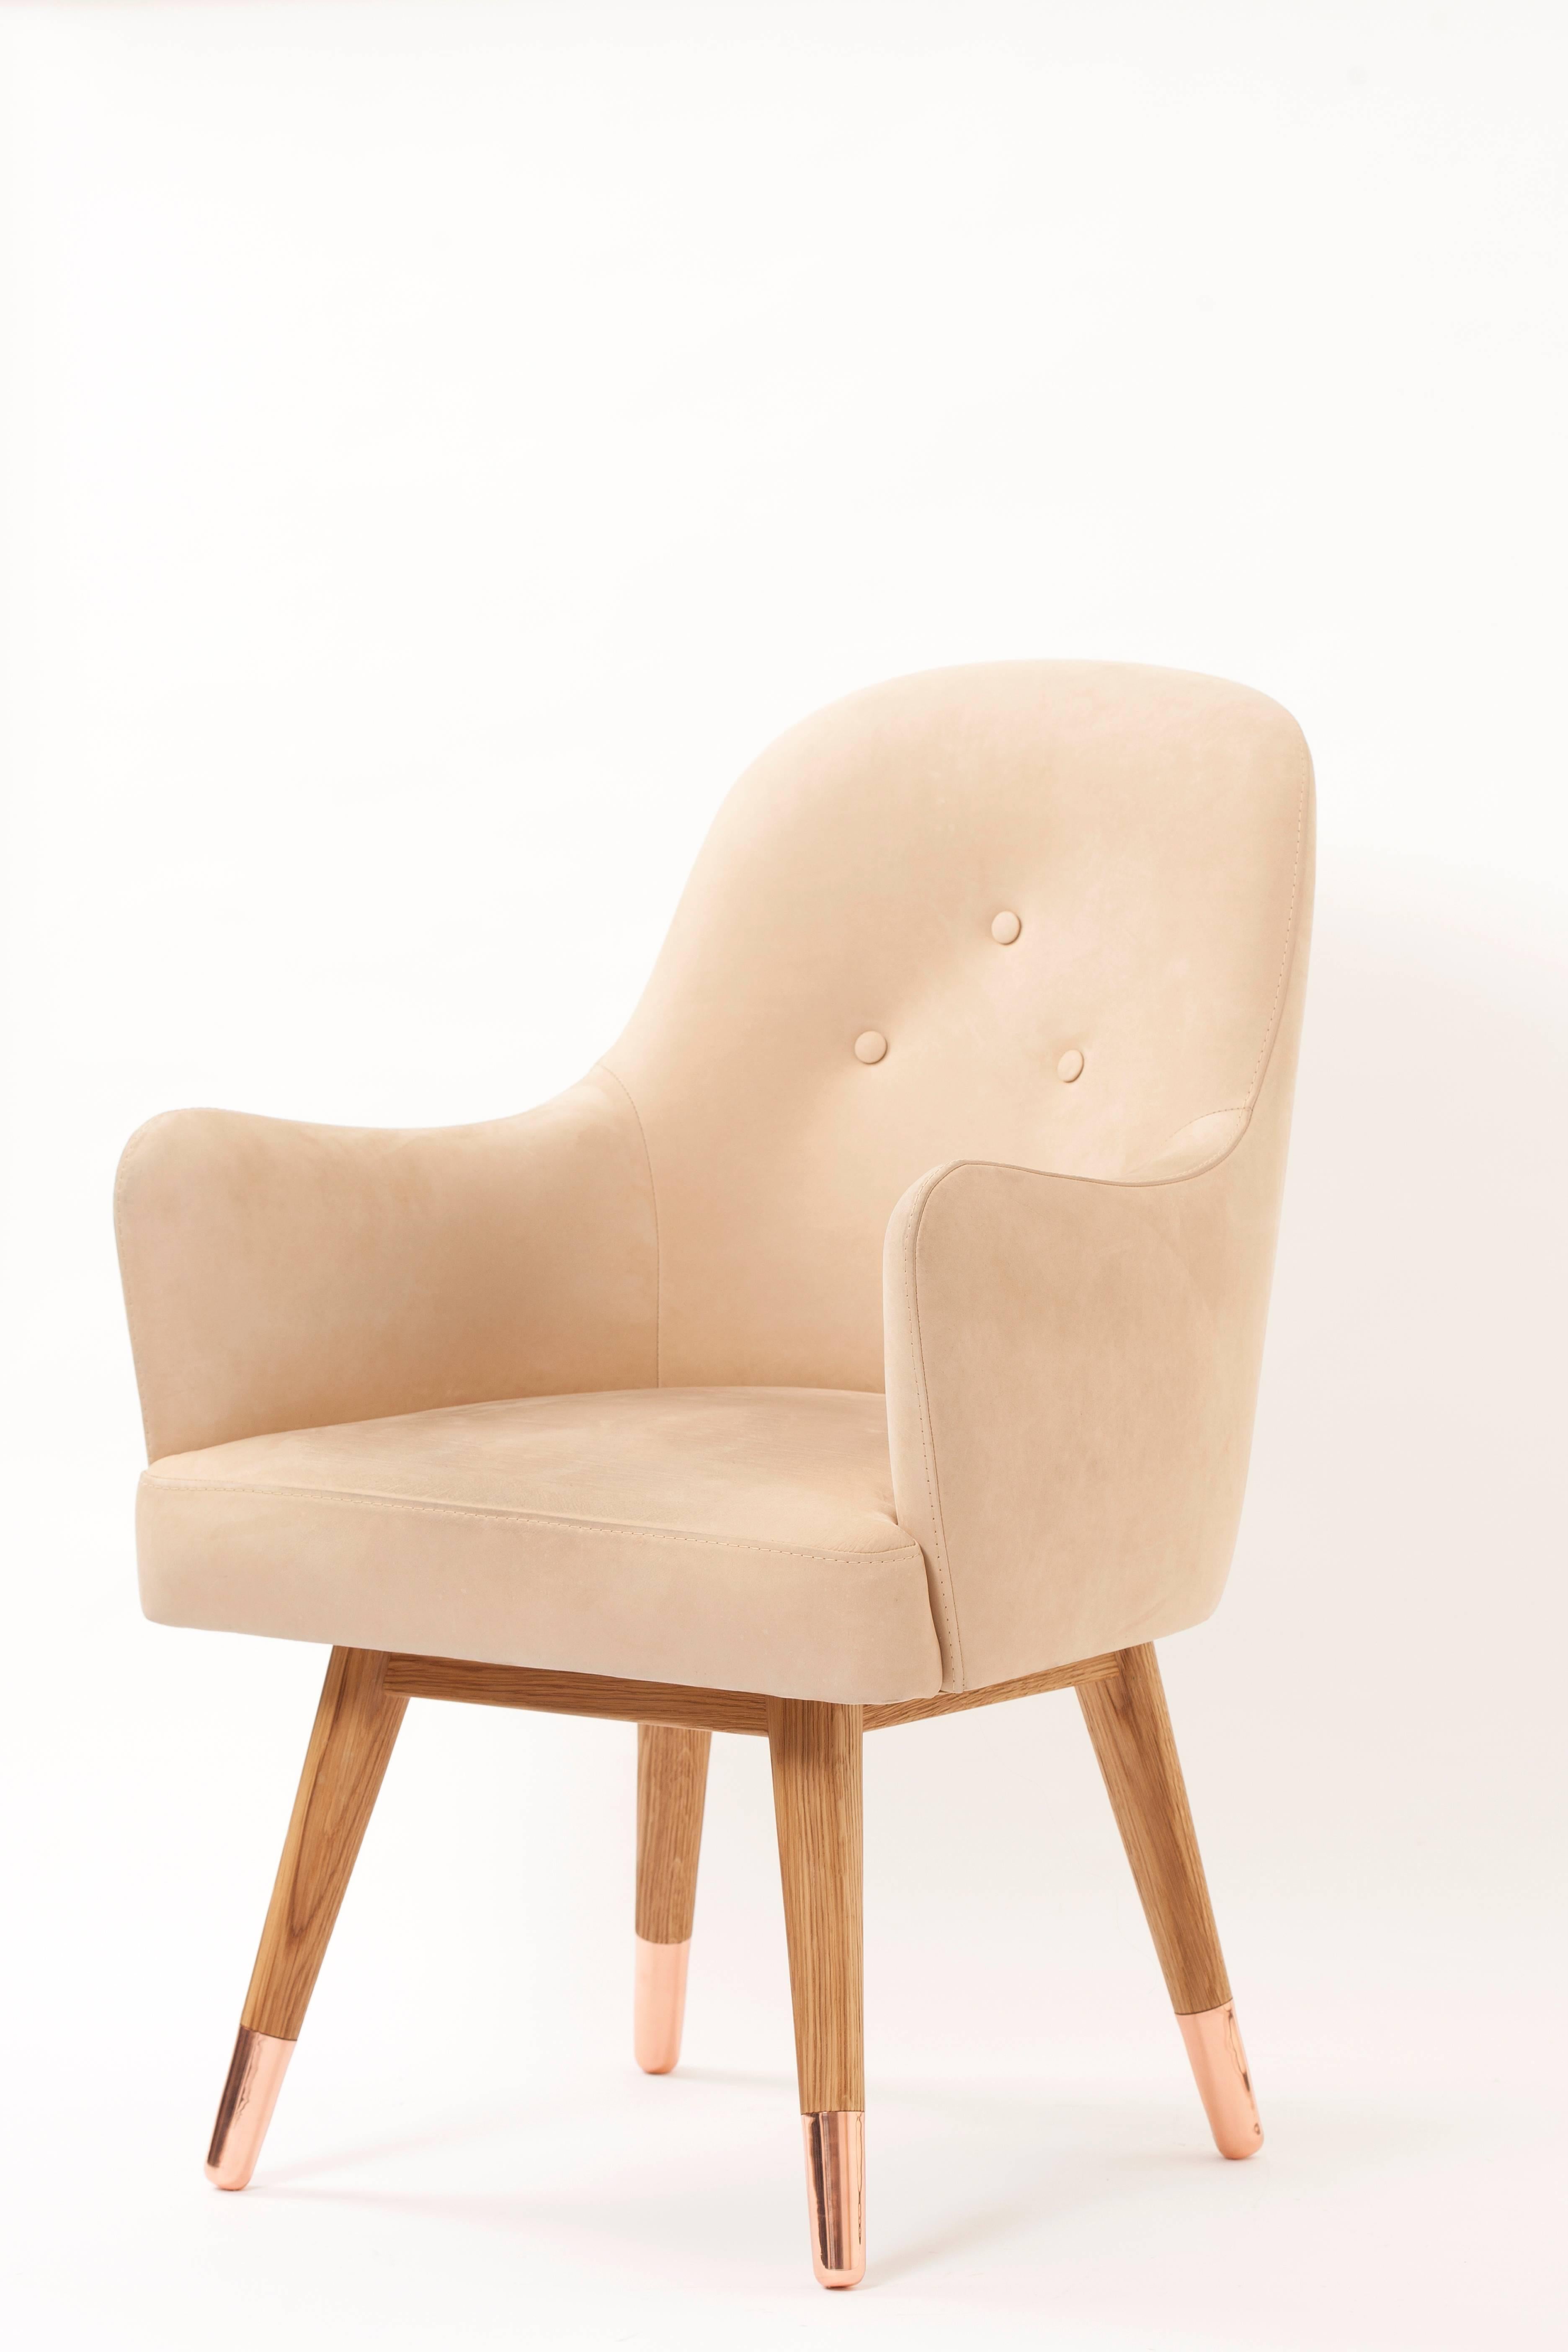 Turkish Contemporary American White Oak Dandy Chair with Beige Suede Leather and Copper For Sale